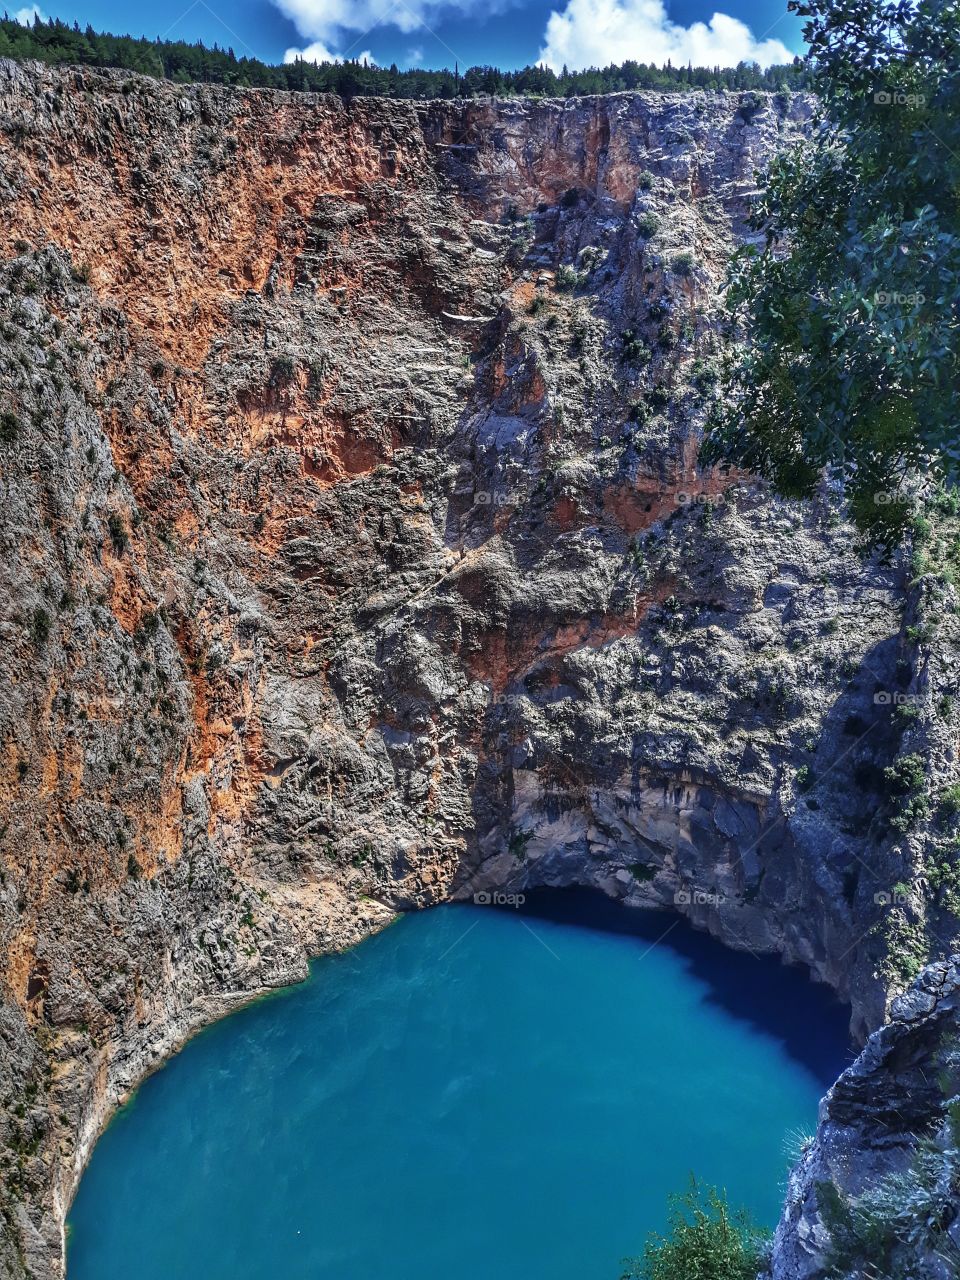 Red Lake - Imotski, Croatia
It is known for its numerous caves and remarkably high cliffs, reaching over 241 metres above normal water level and continuing below the water level. The total explored depth of this sinkhole is approximately 530 metres.